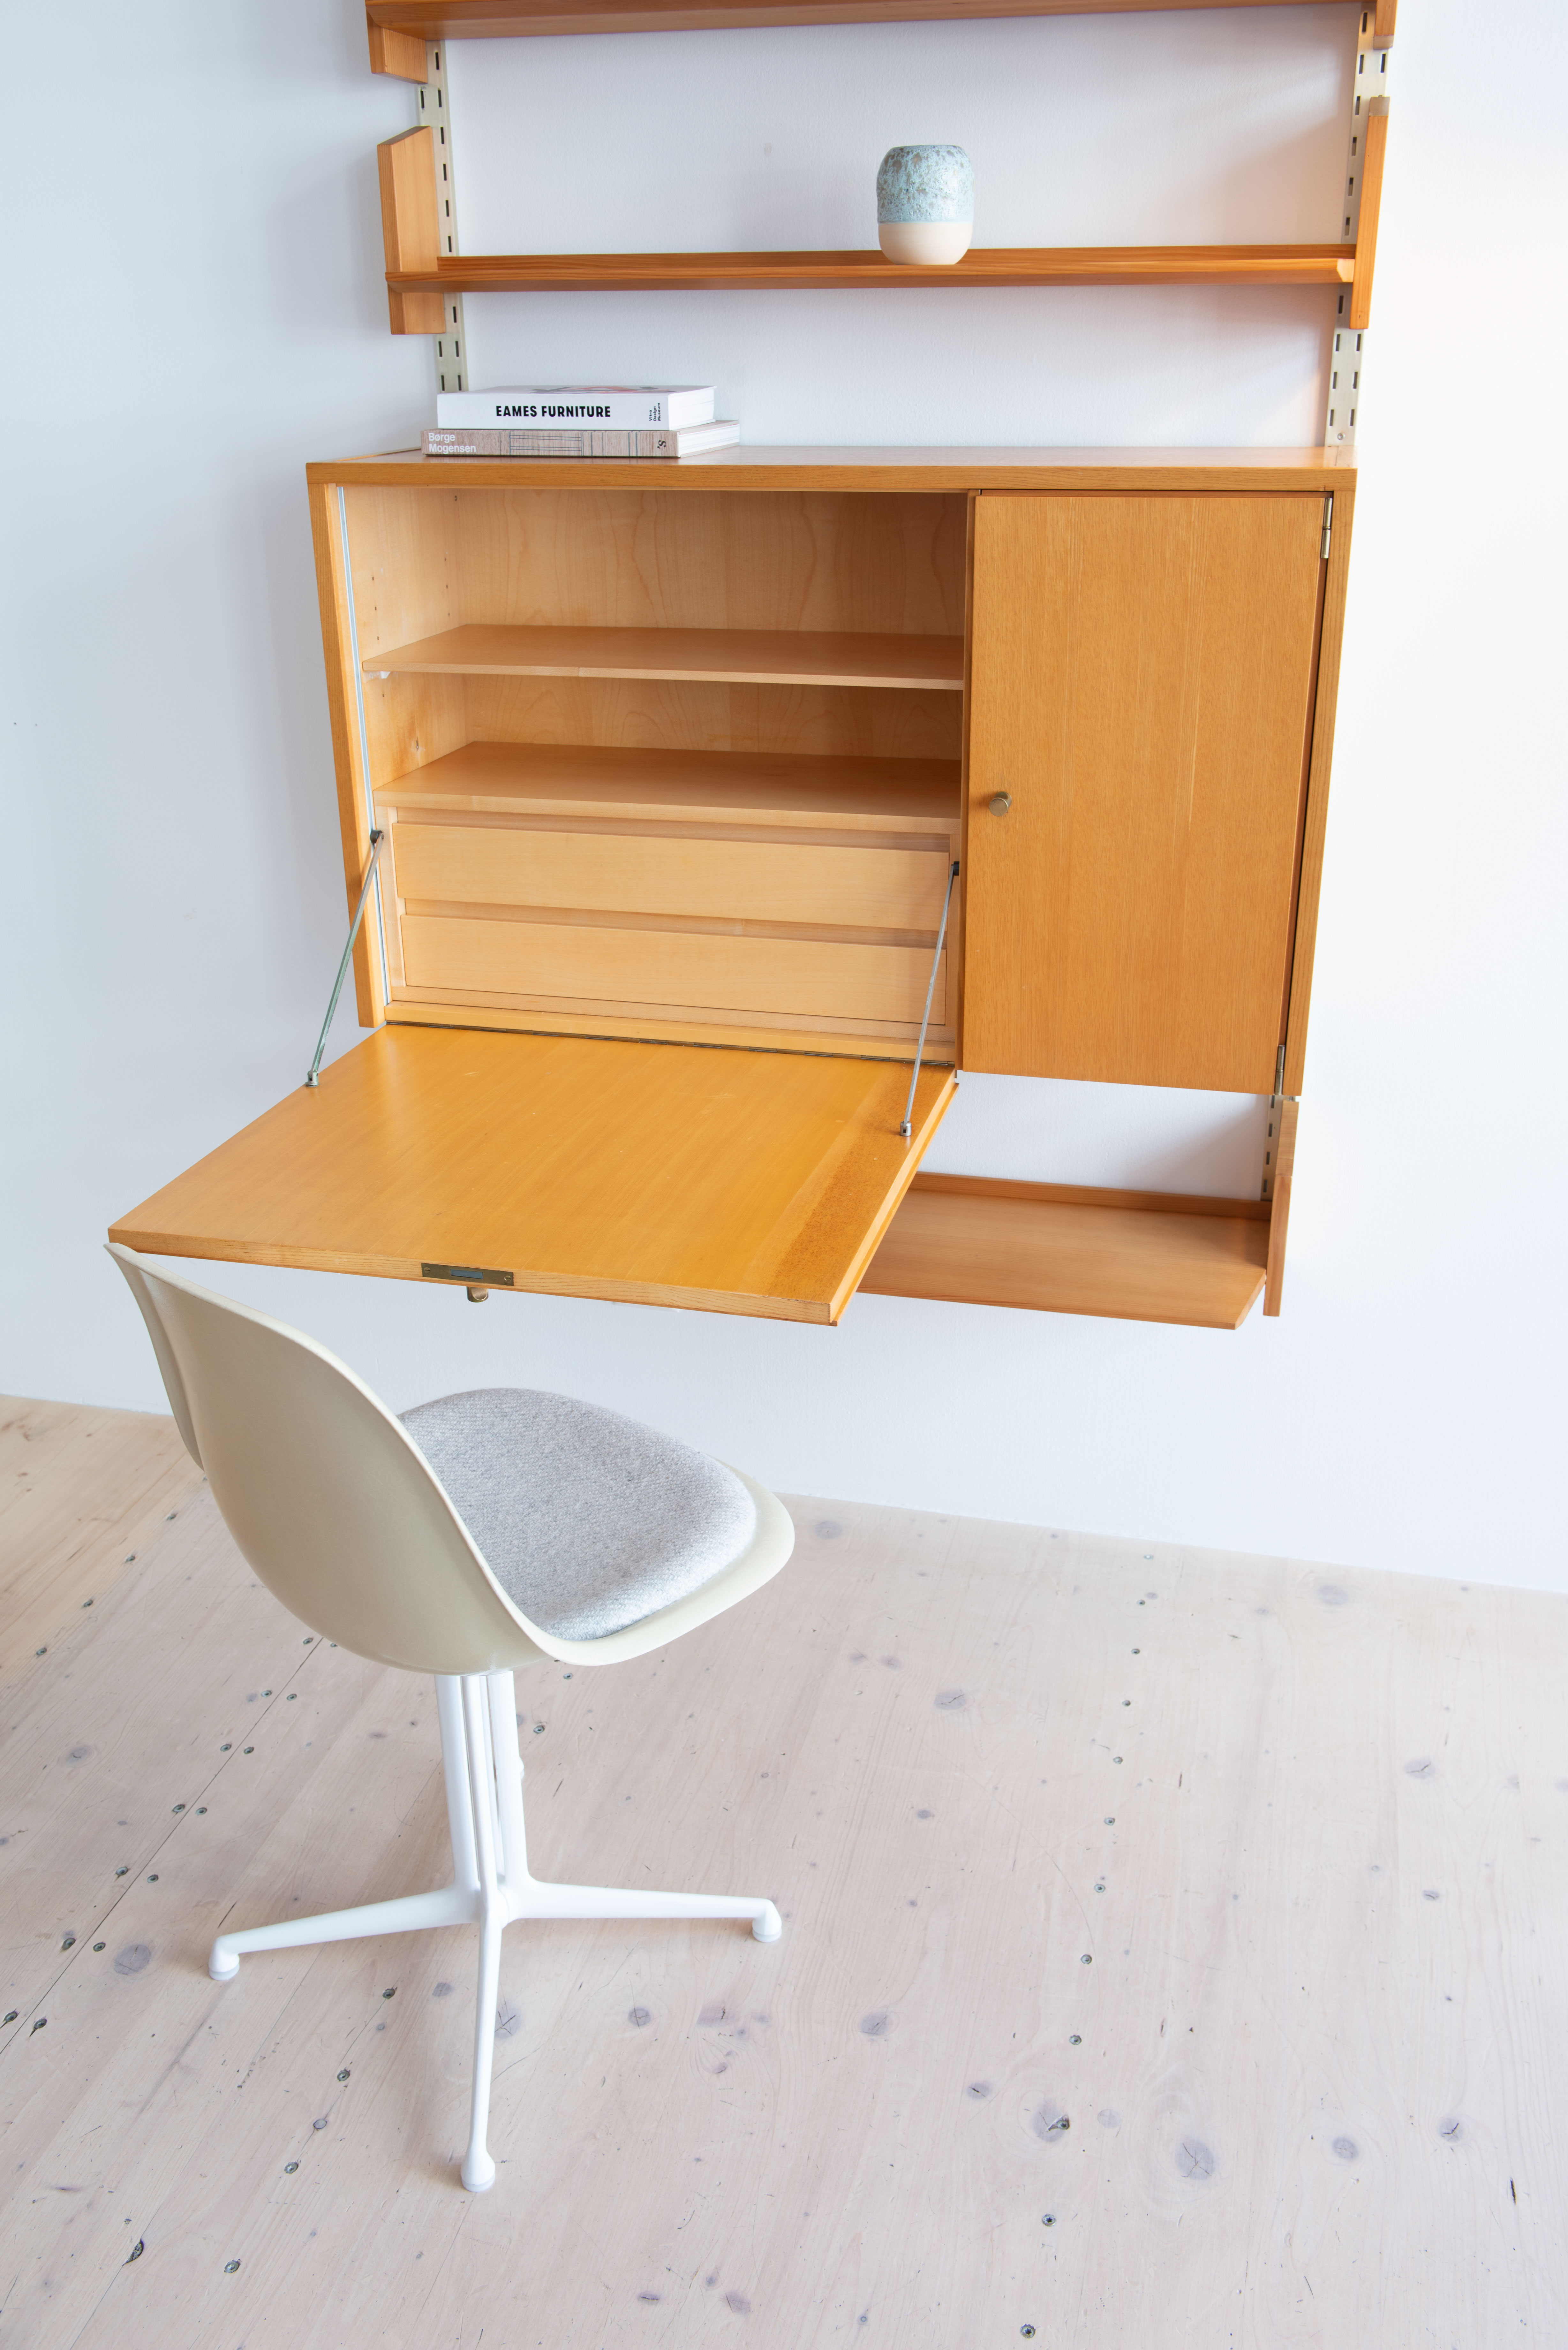 Dieter Reinhold Shelving Unit with Secretary/Desk Function. Produced by WK Möbel in
Germany, 1960s. Available at heyday möbel. Retro Furniture and Other Stuff.